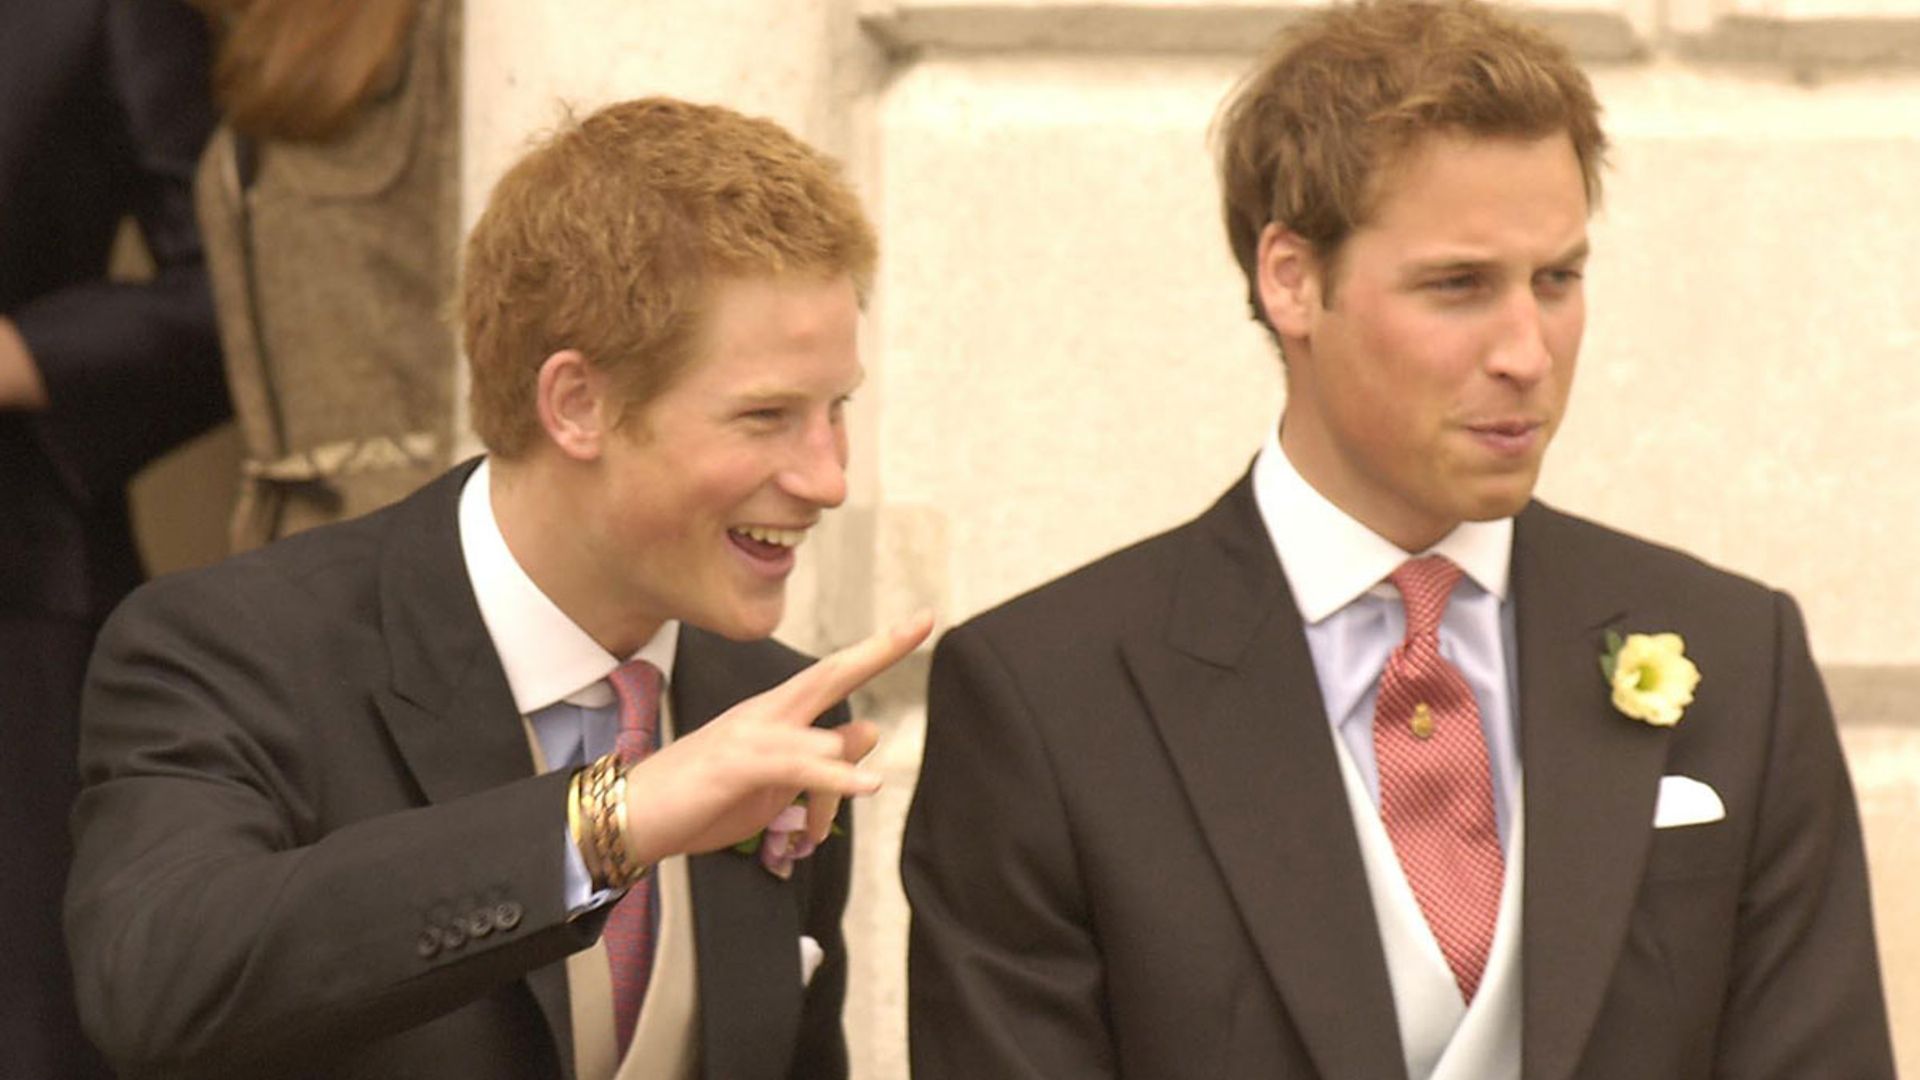 THIS A list actor has been friends with Prince William and Prince Harry since they were kids